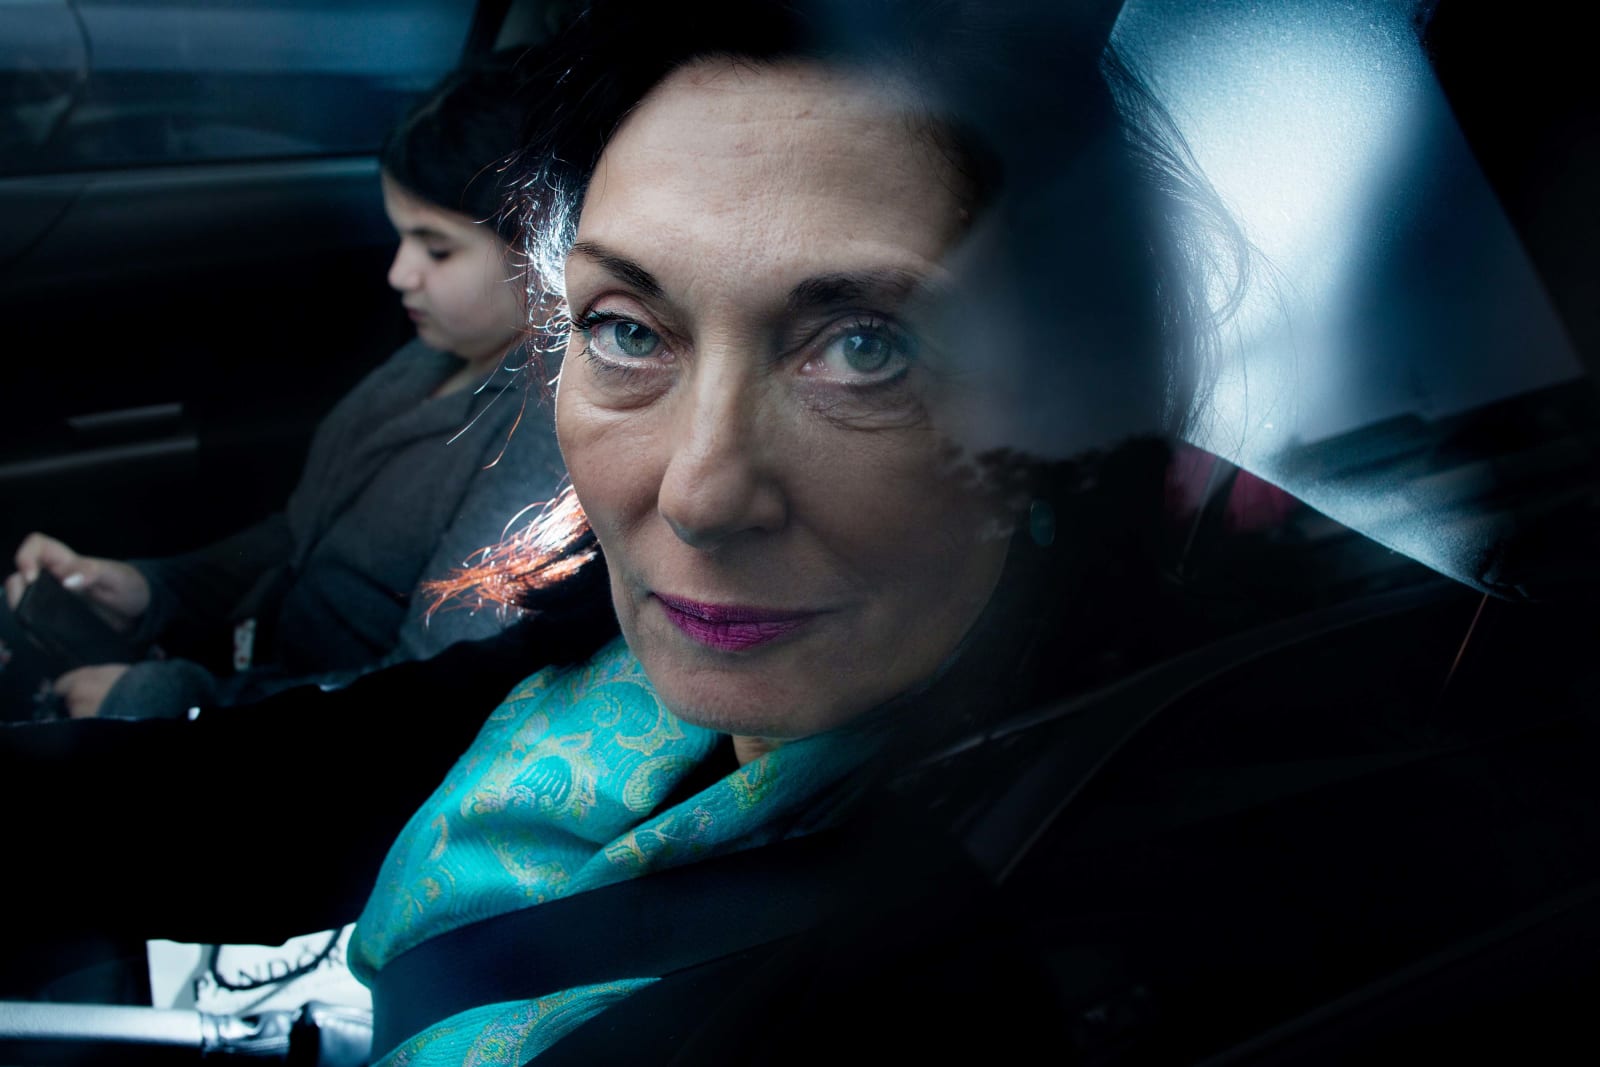 Elinor Carucci photograph of her mother and daughter inside of a car with a close up on her mother's face looking out the window